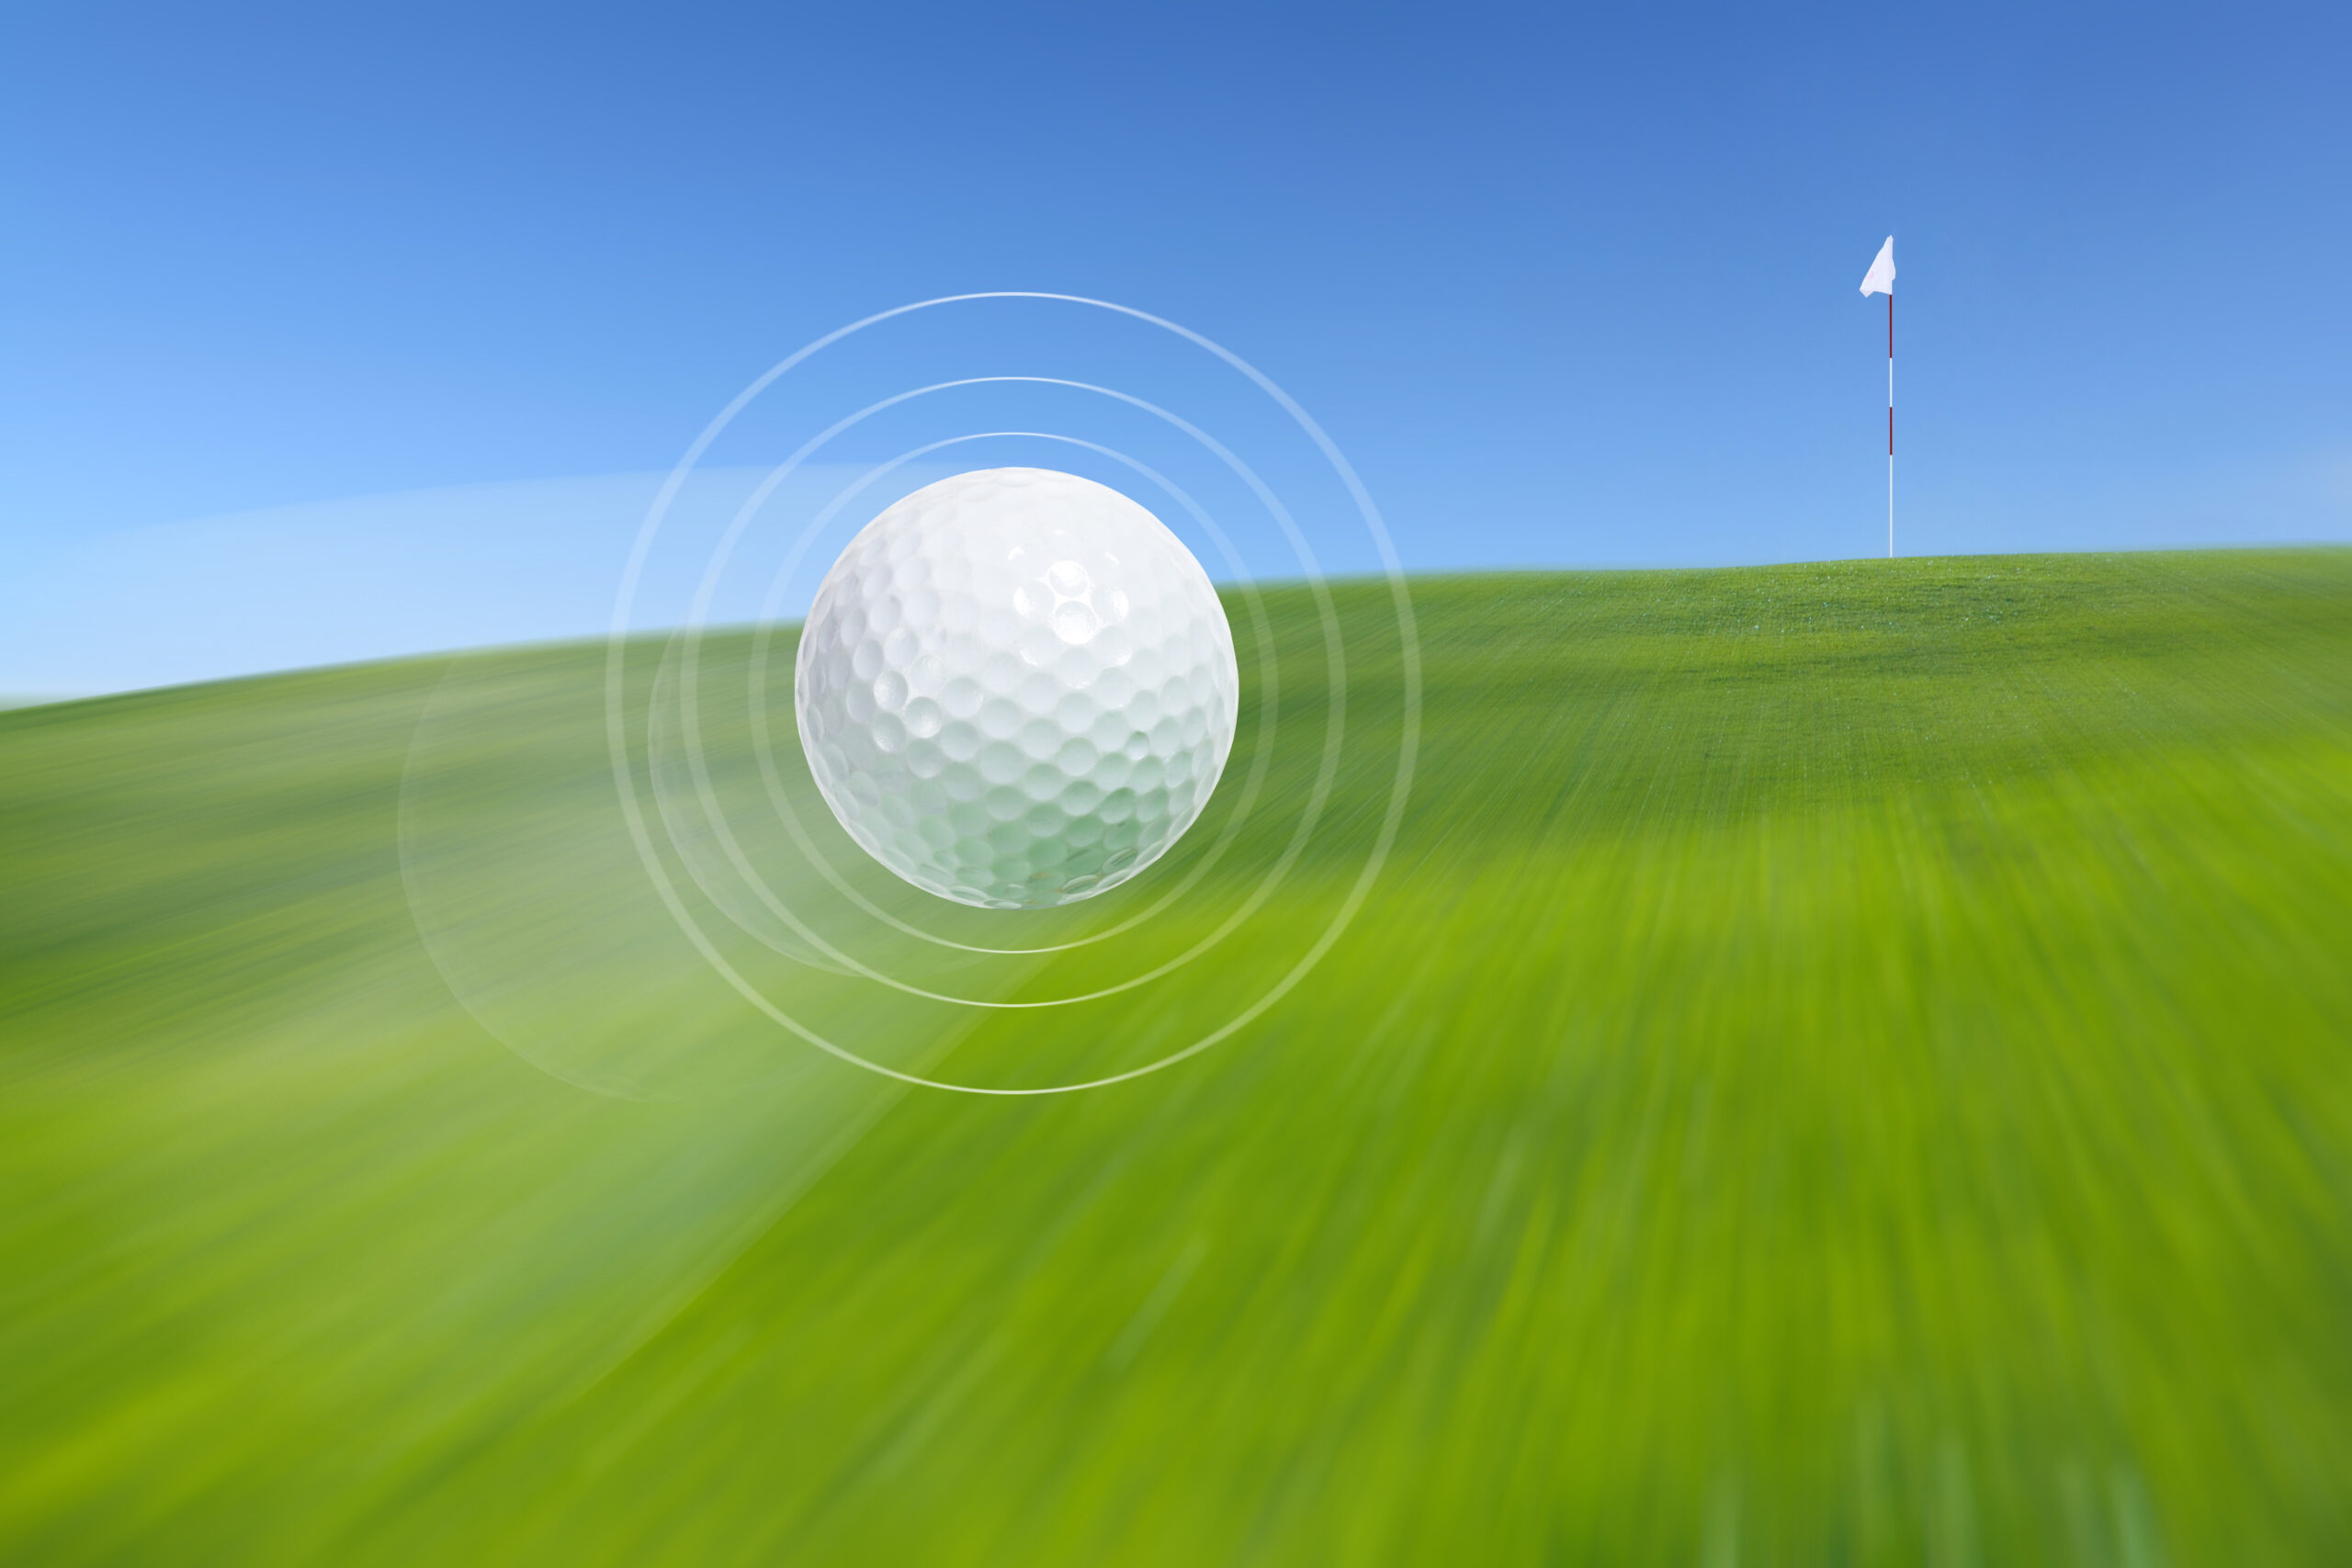 Golf ball in motion moving towards the hole